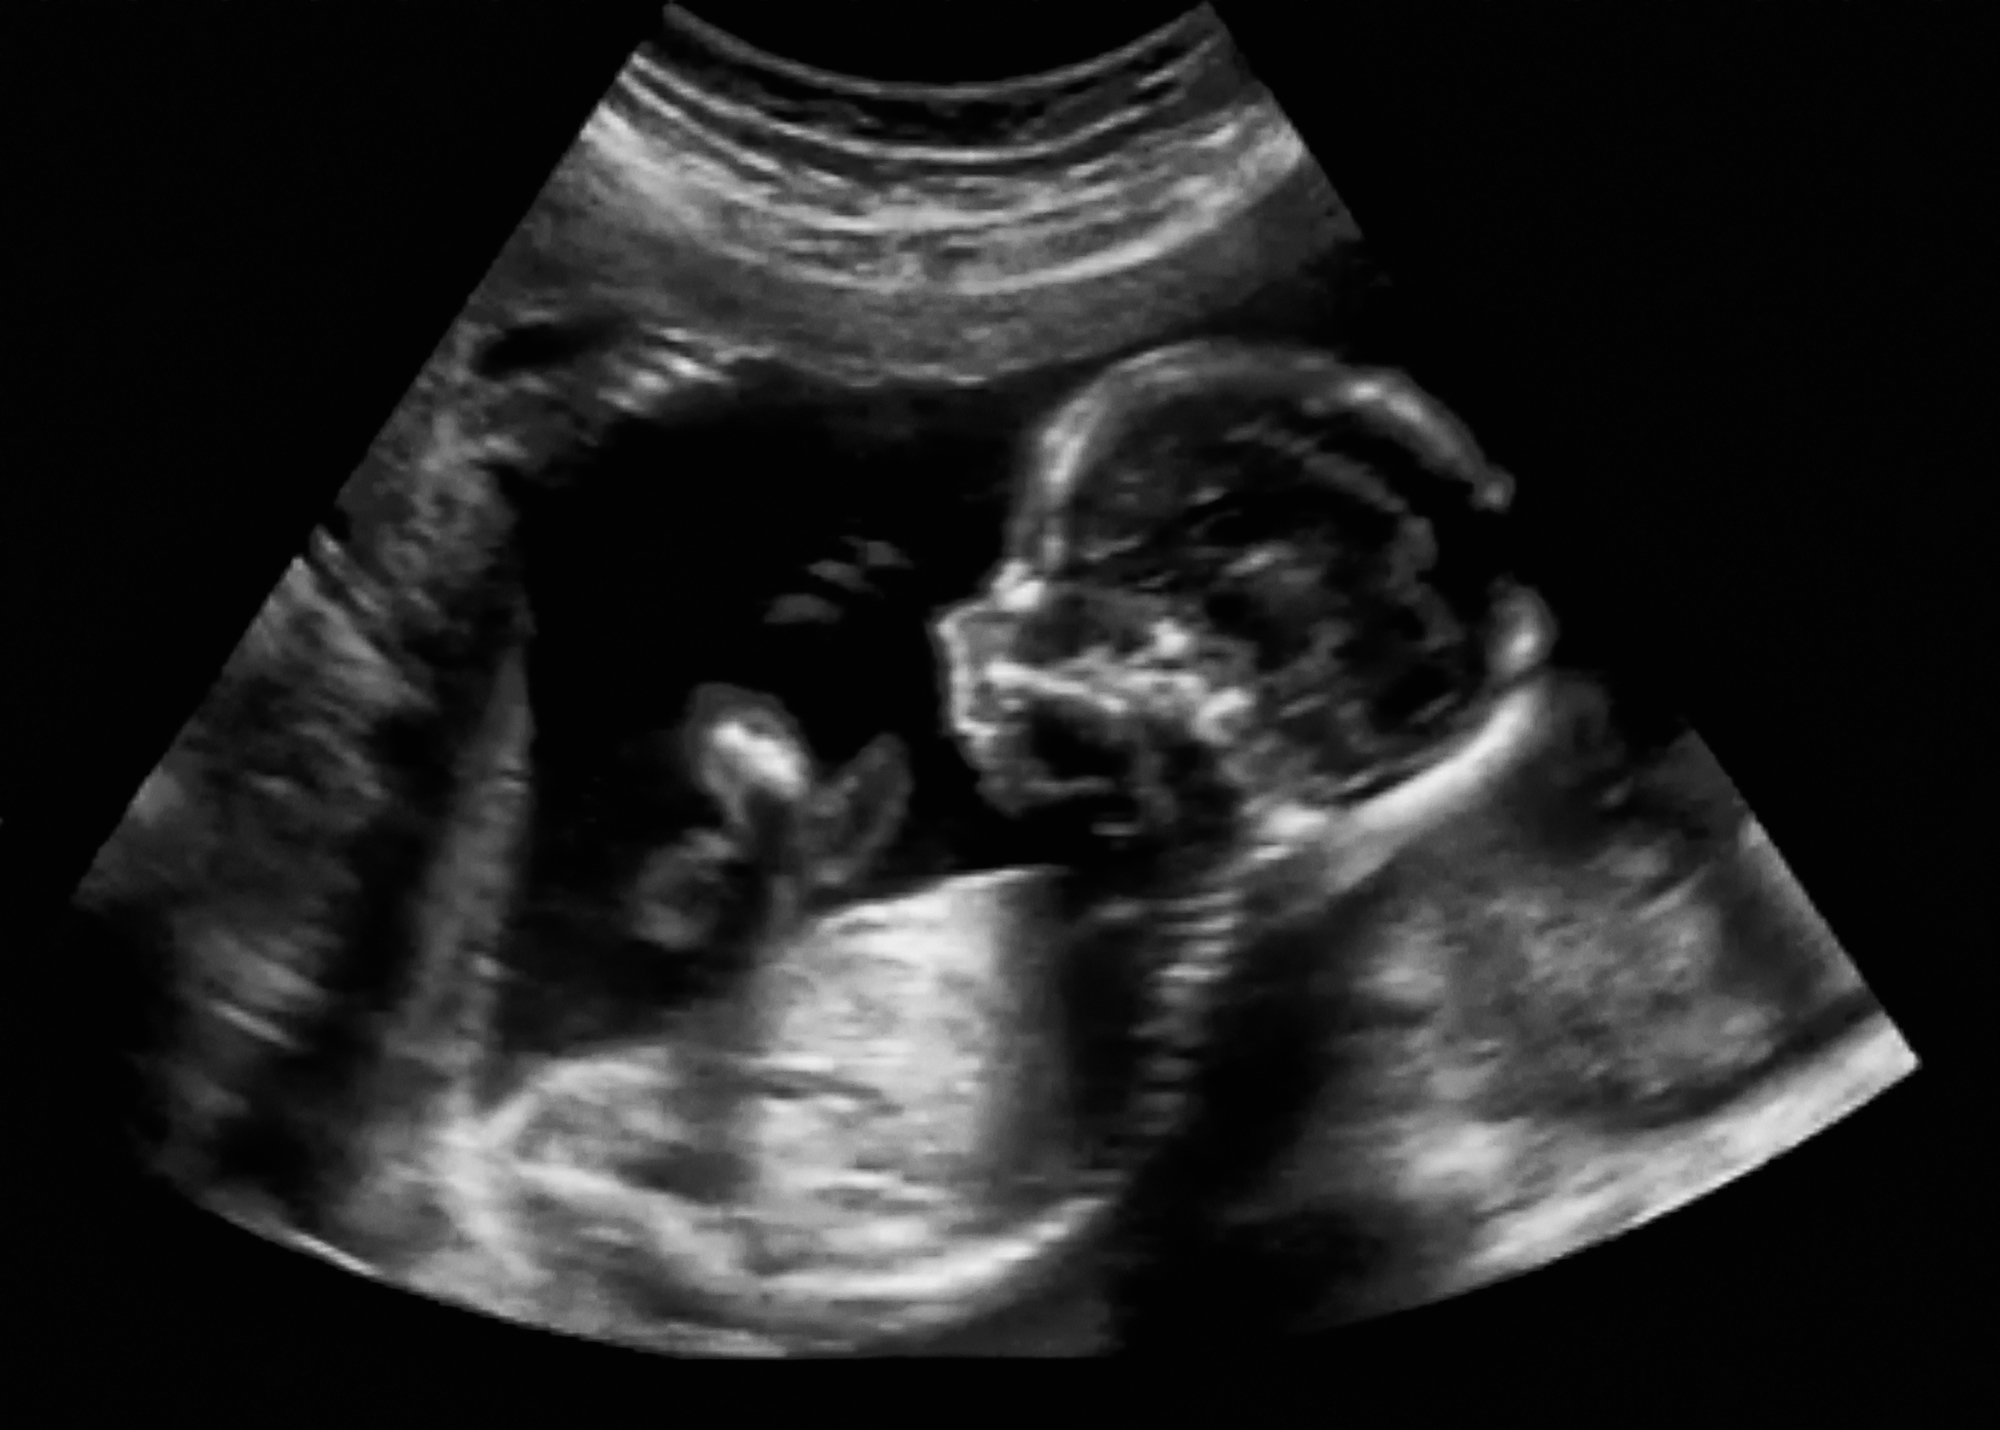 Ultrasound and Roe v. Wade